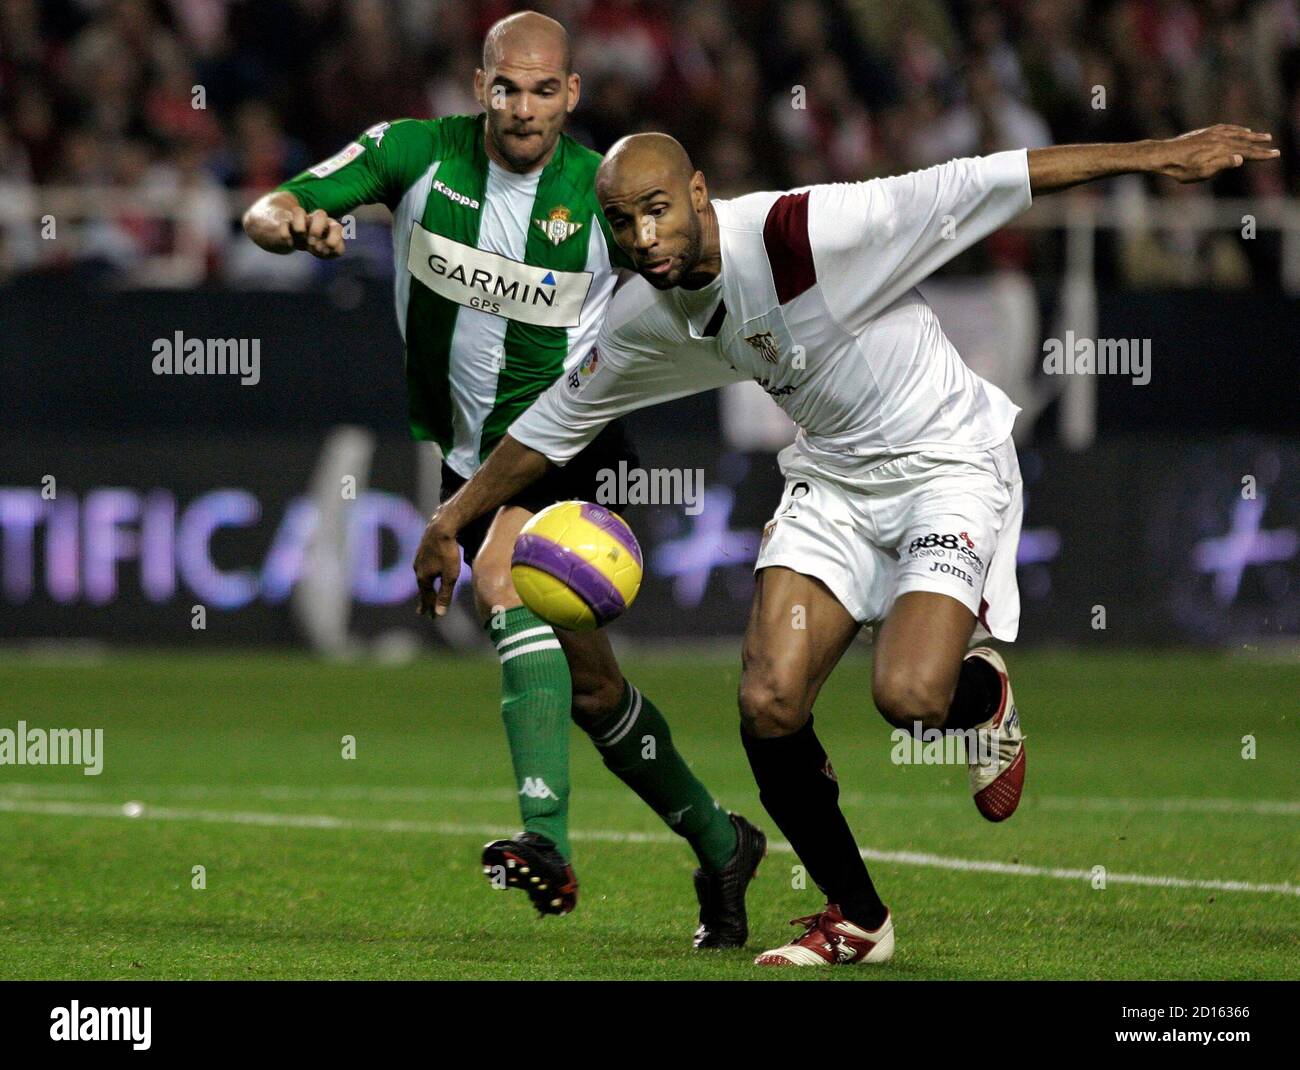 Sevilla's Frederic Kanoute (R) of Mali and Real Betis' David Rivas fight  for the ball during their Spanish first division soccer match at Ramon  Sanchez Pizjuan stadium in Seville January 6, 2008.